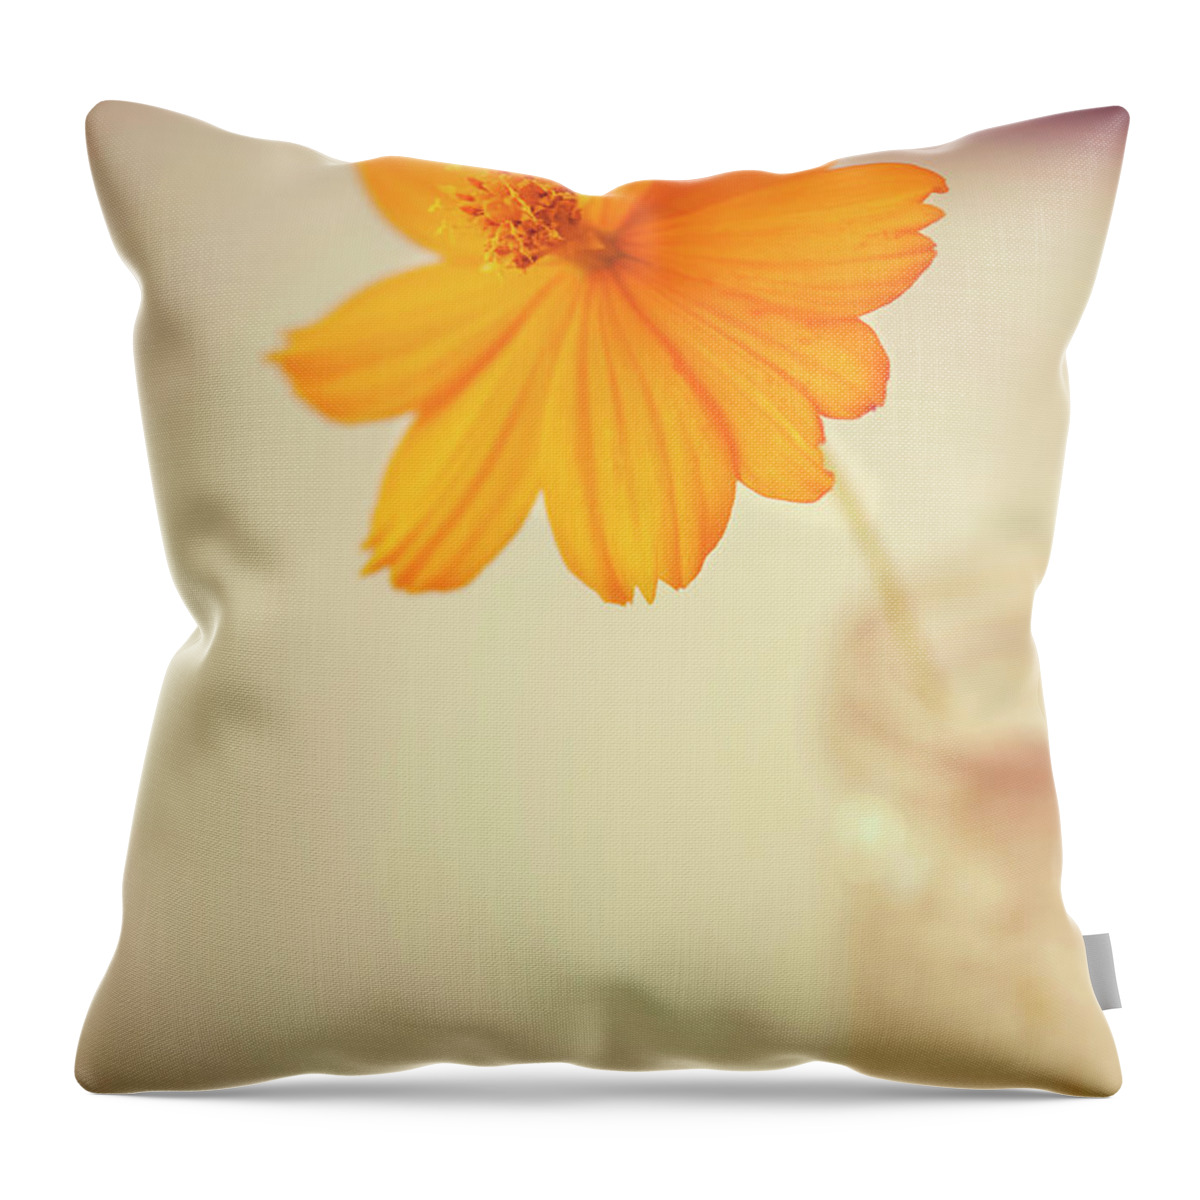 Orange Color Throw Pillow featuring the photograph Daisy Flower In Vase by Carolyn Hebbard